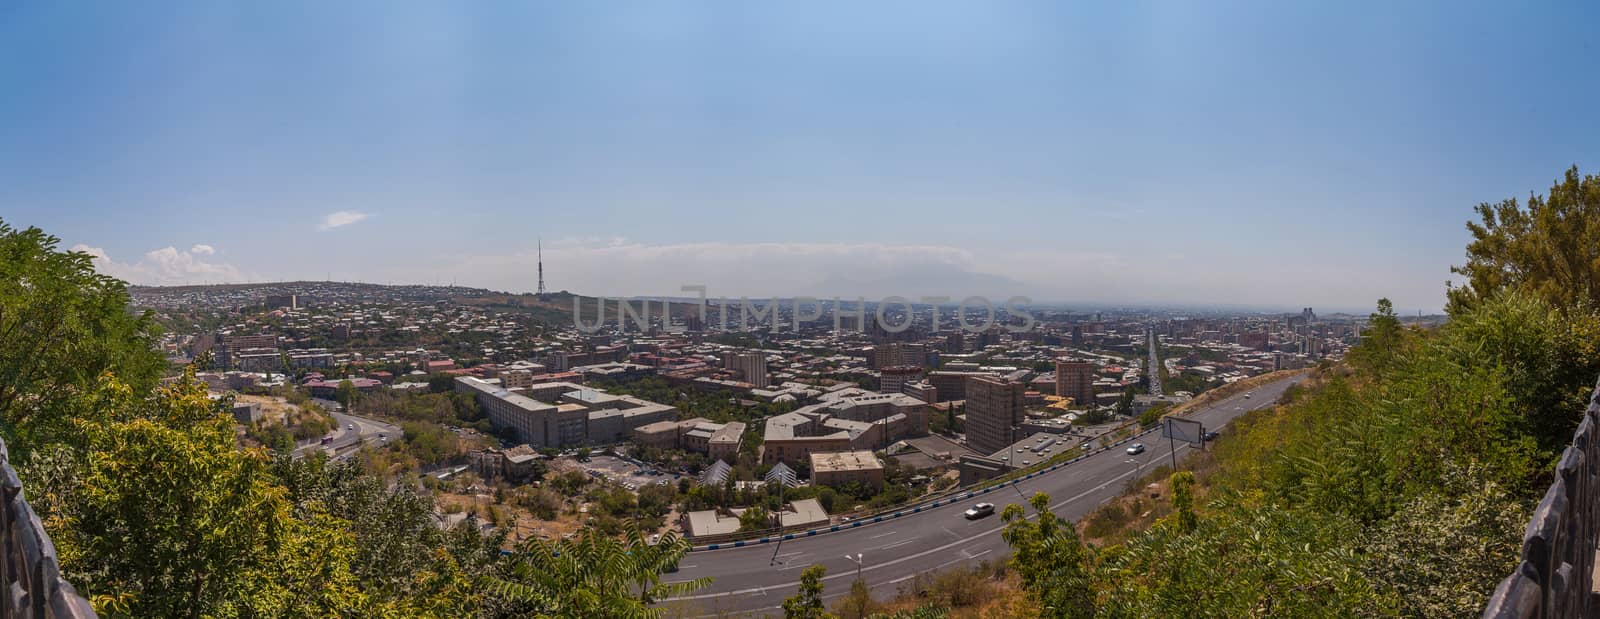 View of the city of Yerevan from height